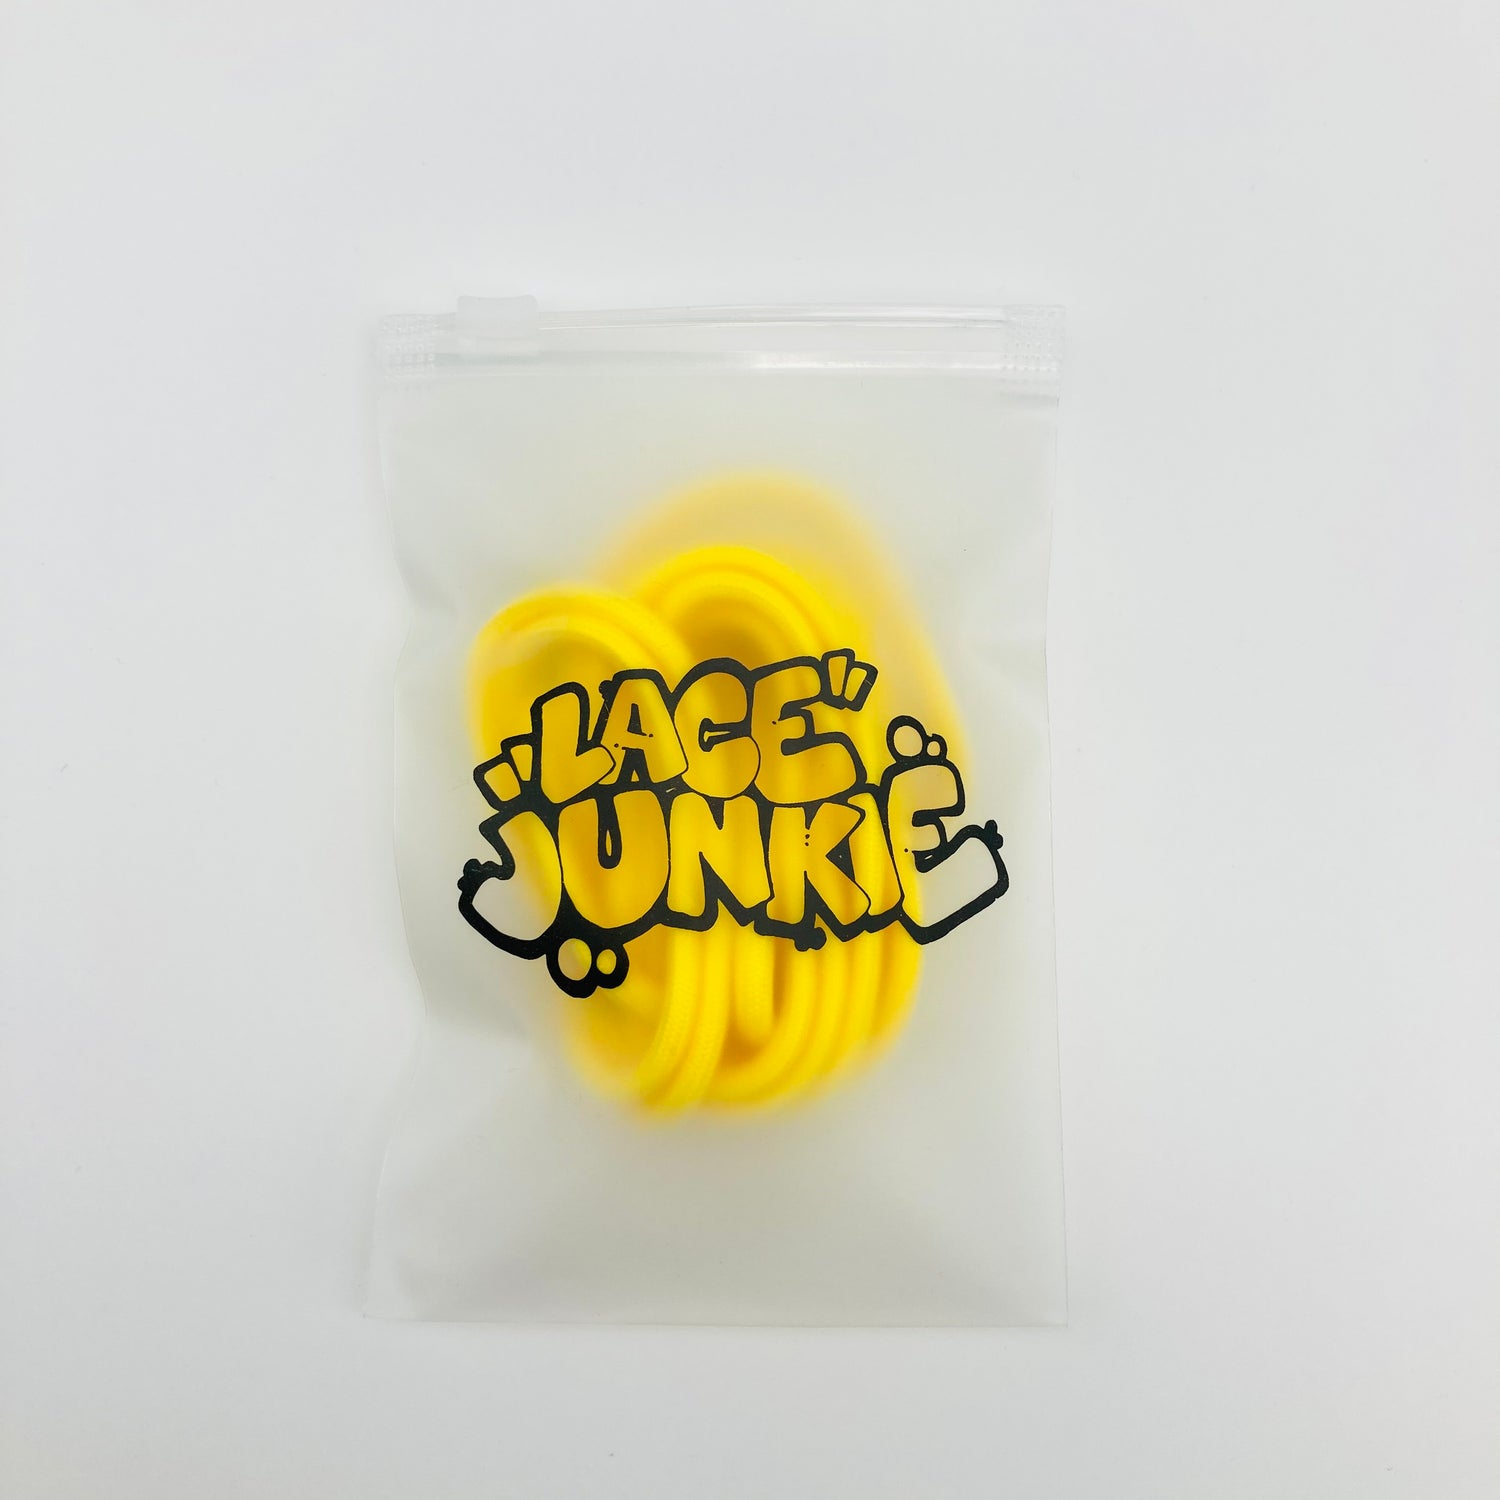 Lace Junkie Yellow Single Colour Rope Laces